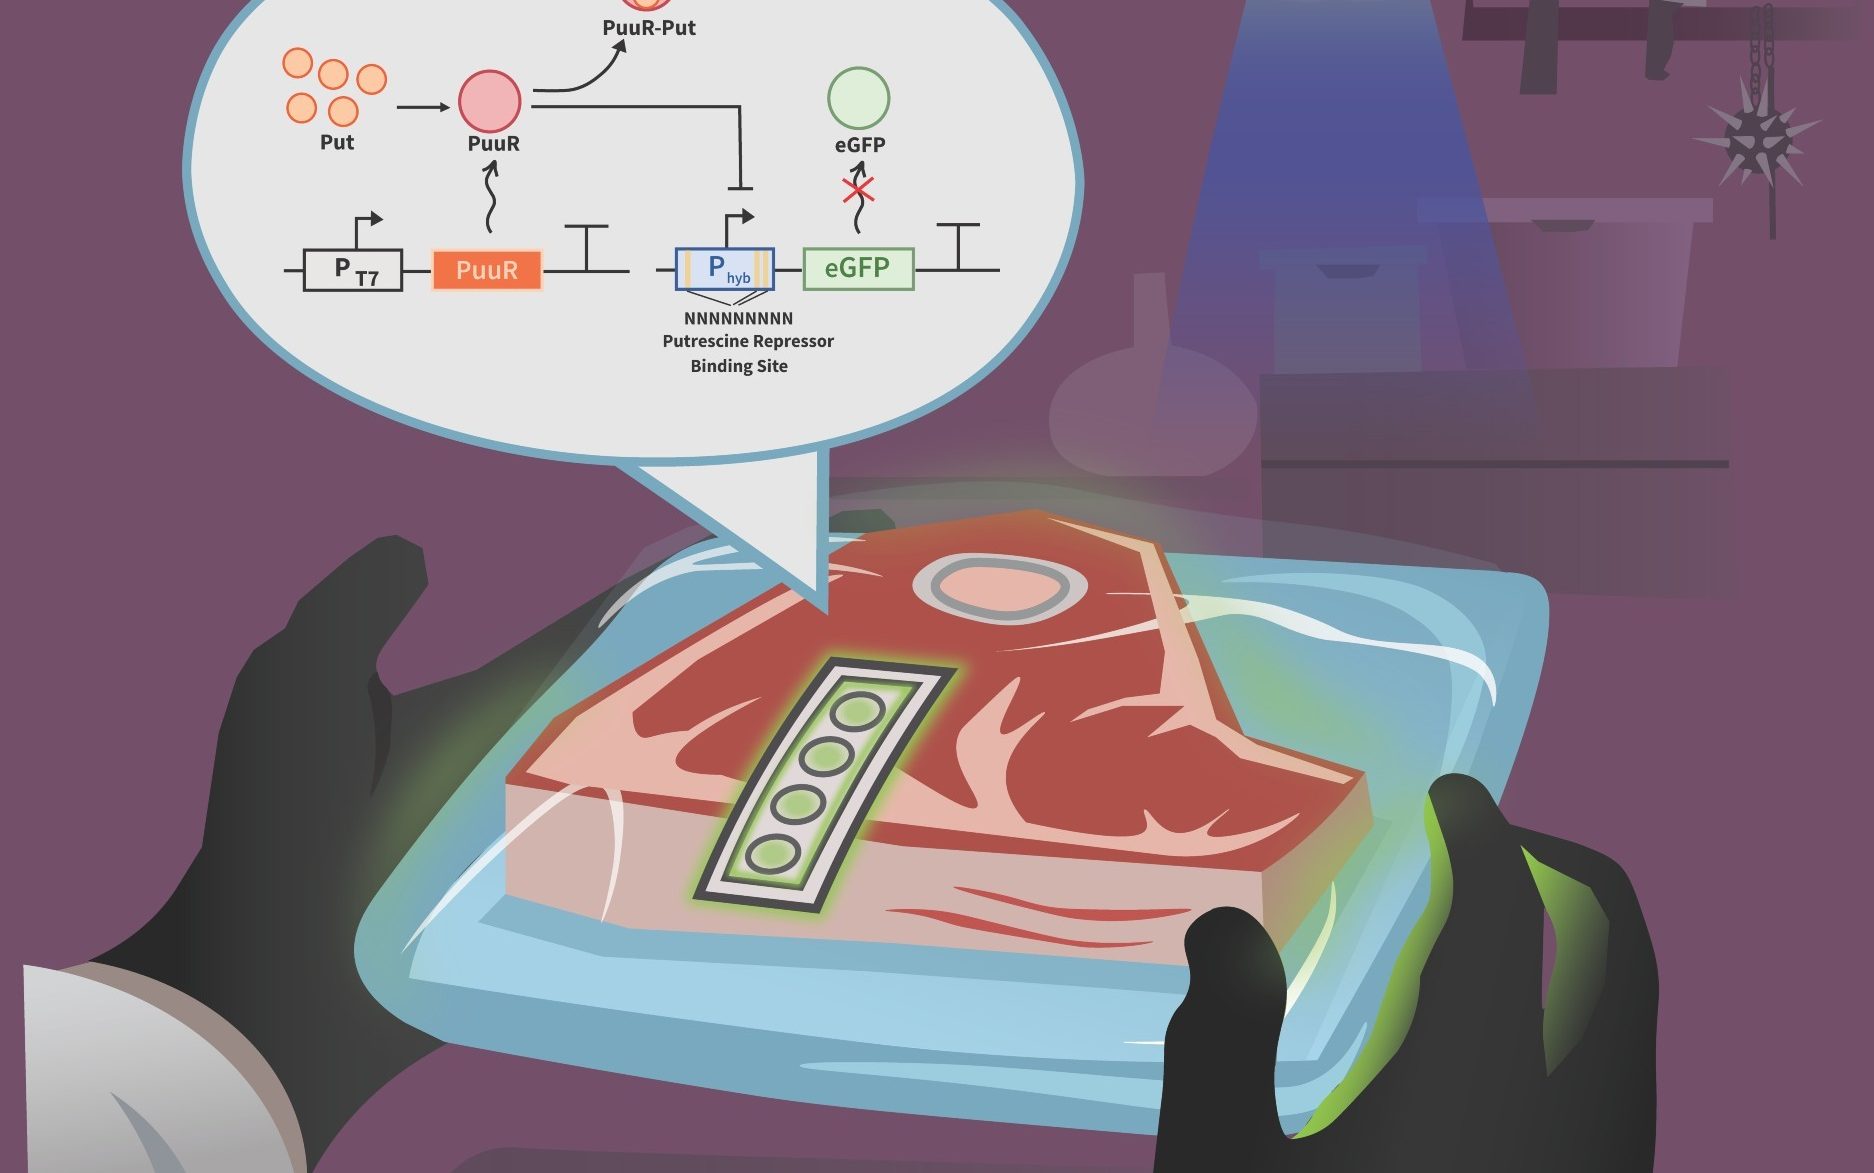 Rotten Meat Could Be Easier to Detect Thanks to a New Biosensor System Developed at Concordia